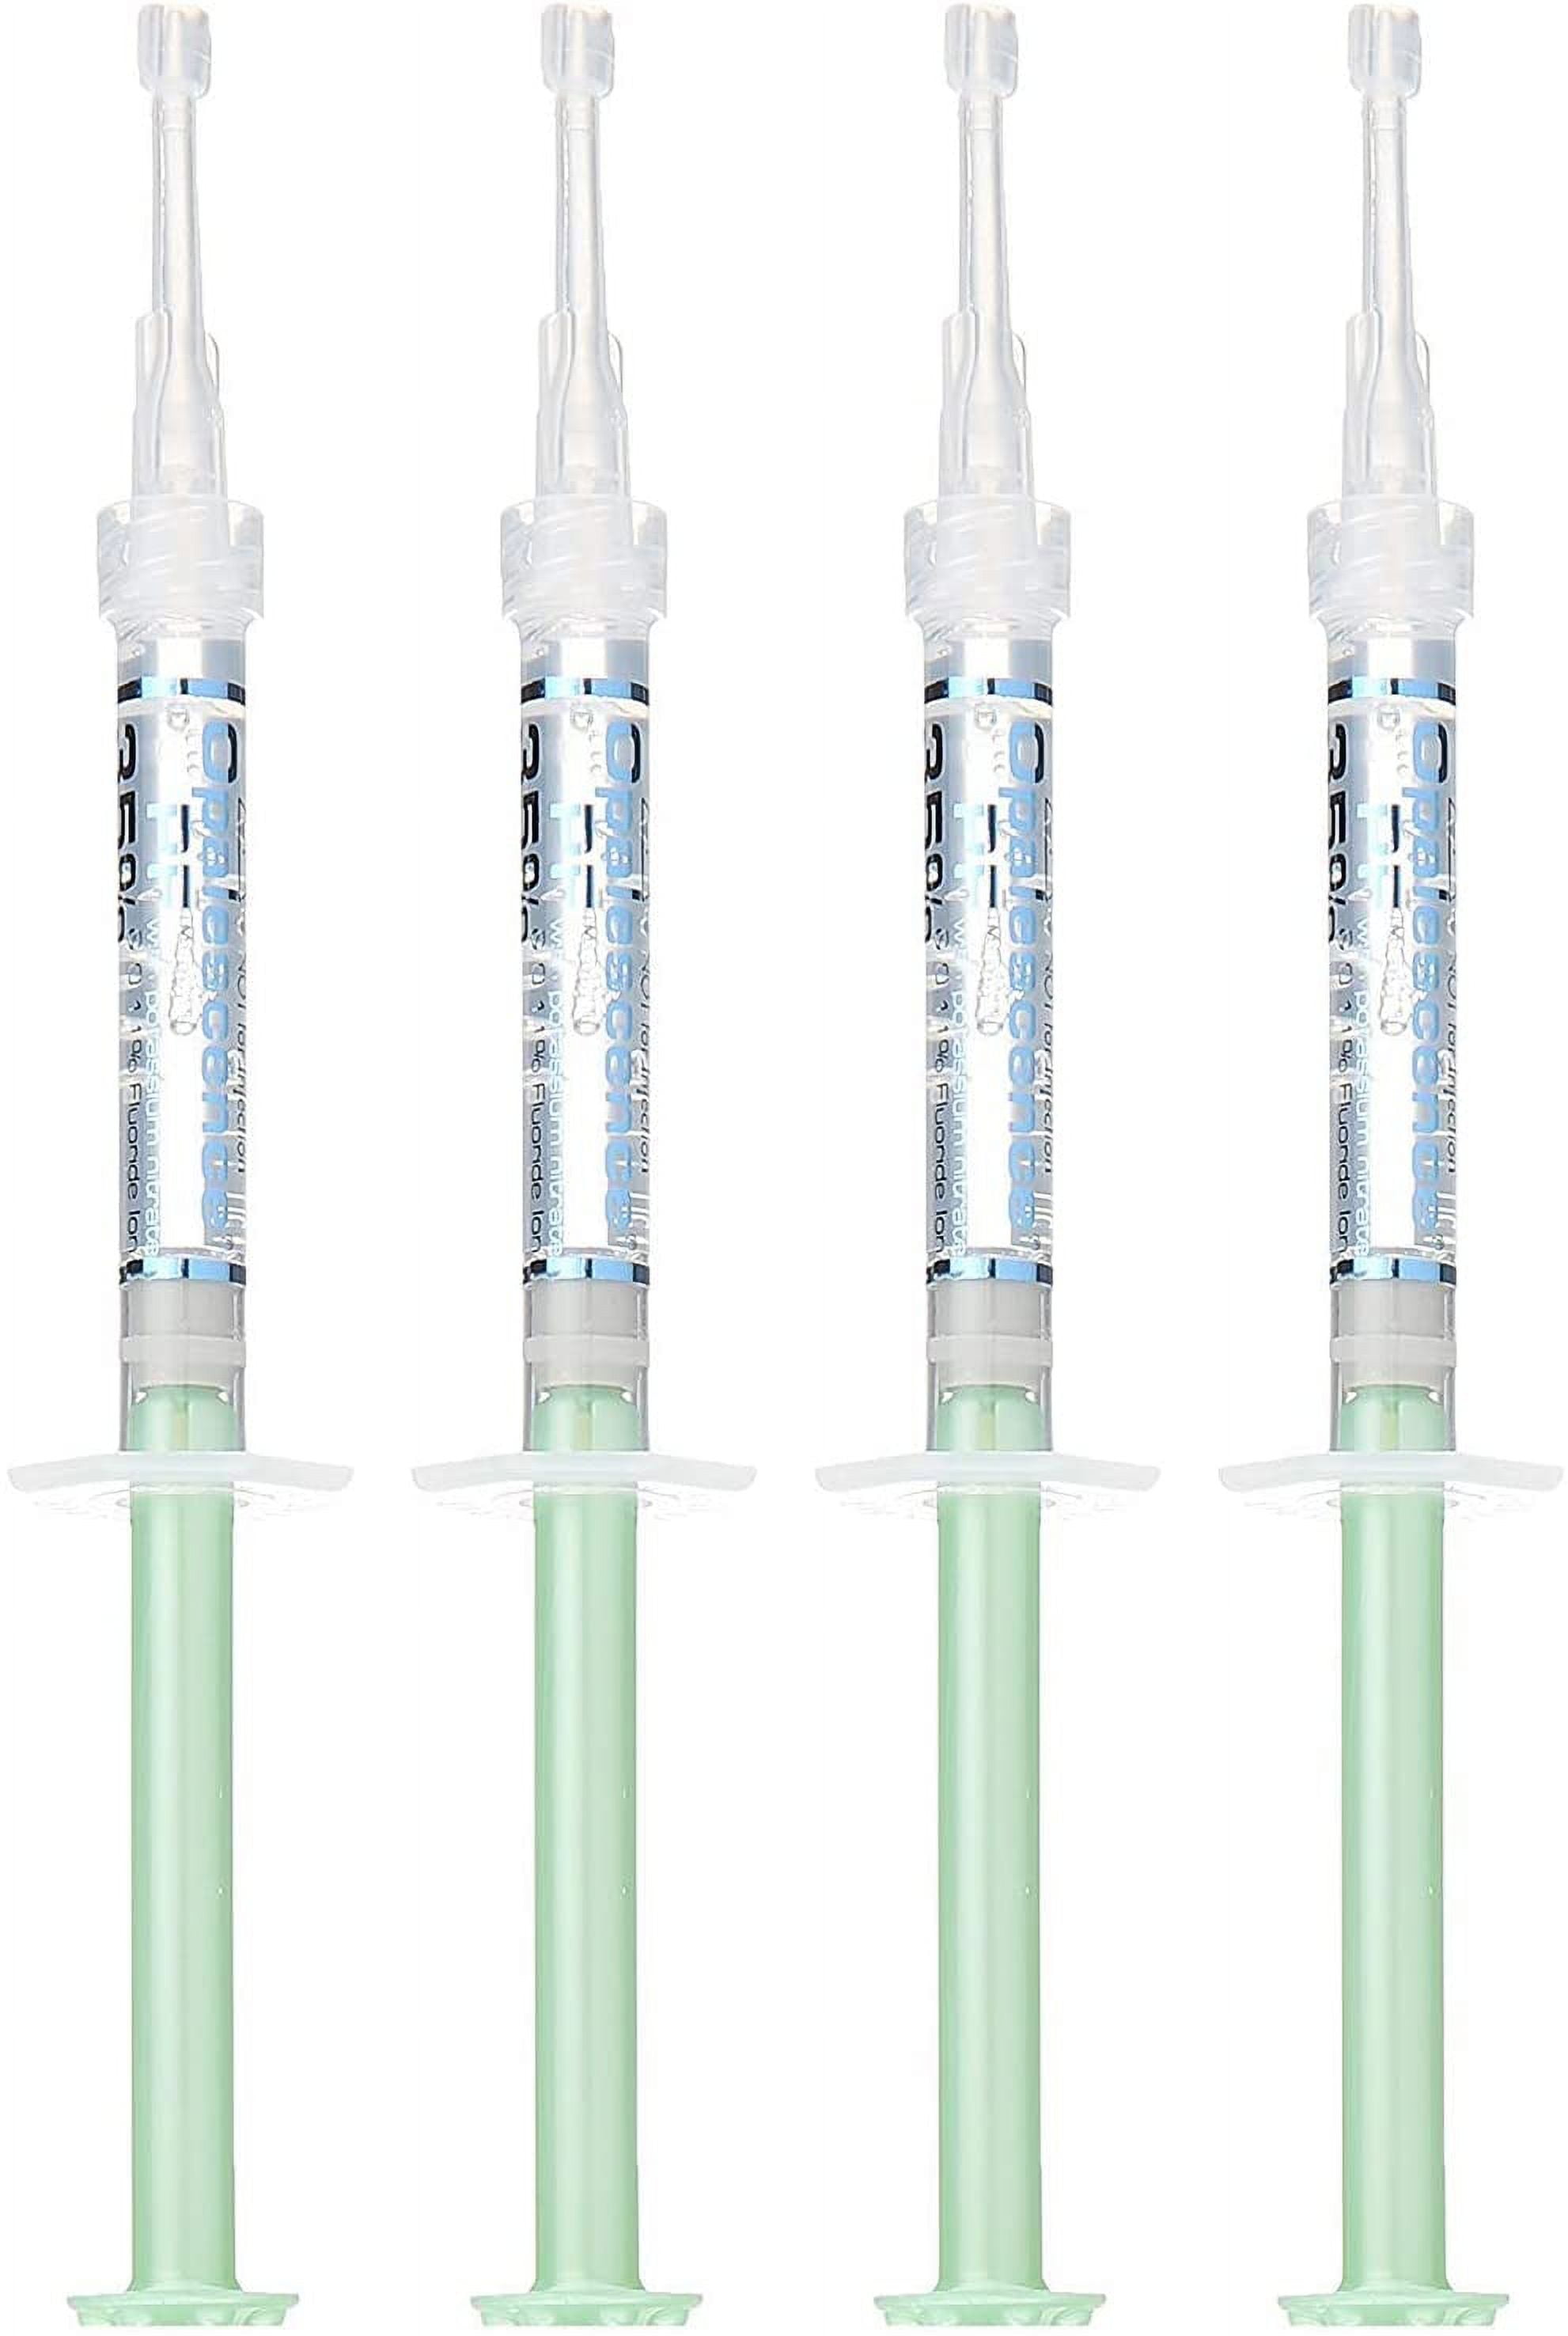 Opalescence 20% Gel Syringes Teeth Whitening - Refill Kit (8 Syringes)  Carbamide Peroxide, Fluoride. Made by Ultradent, in Mint Flavor. Tooth